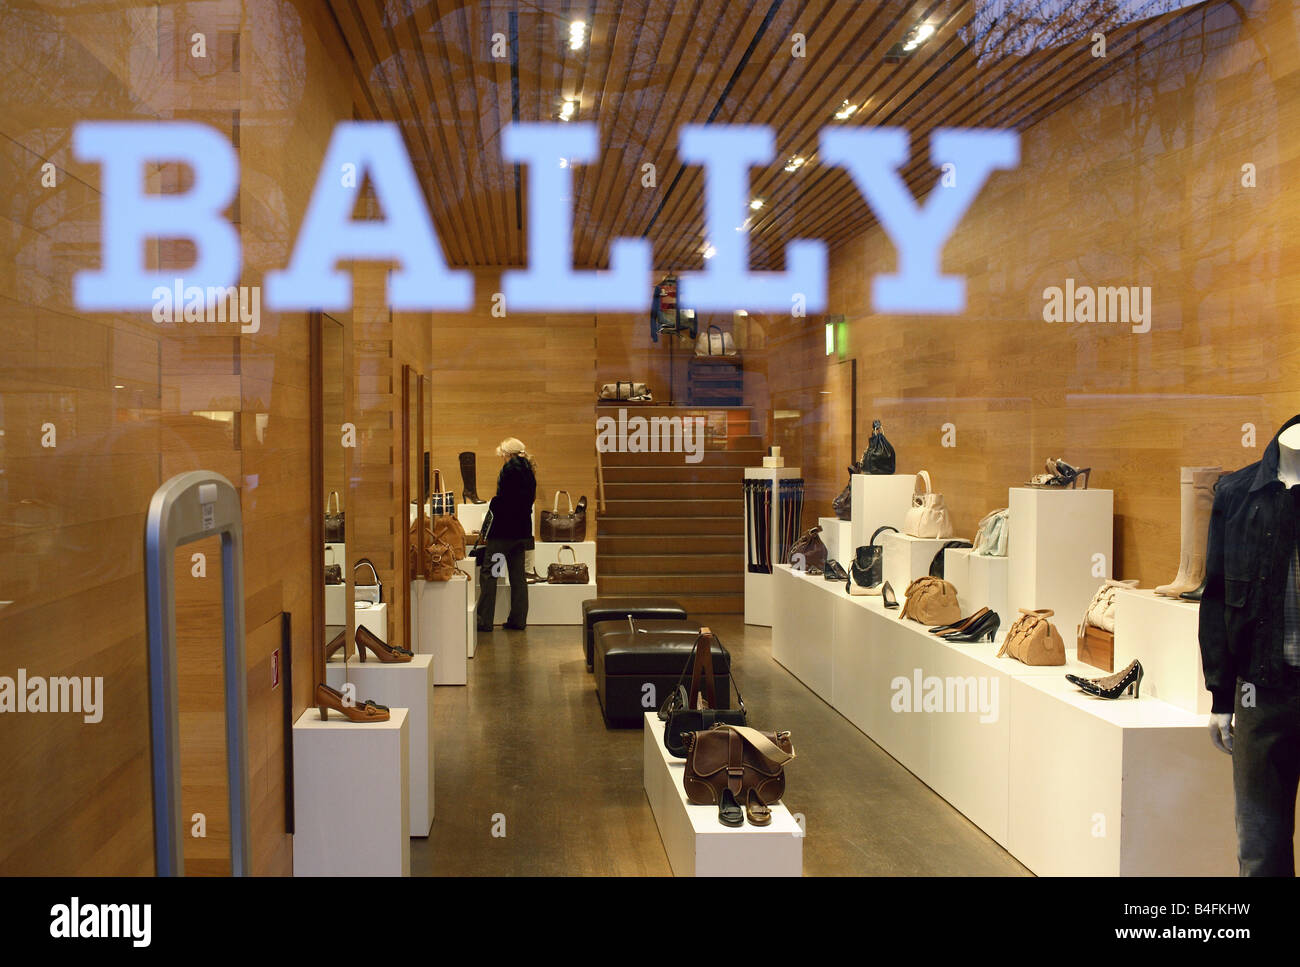 Bally Store High Resolution Stock Photography and Images - Alamy